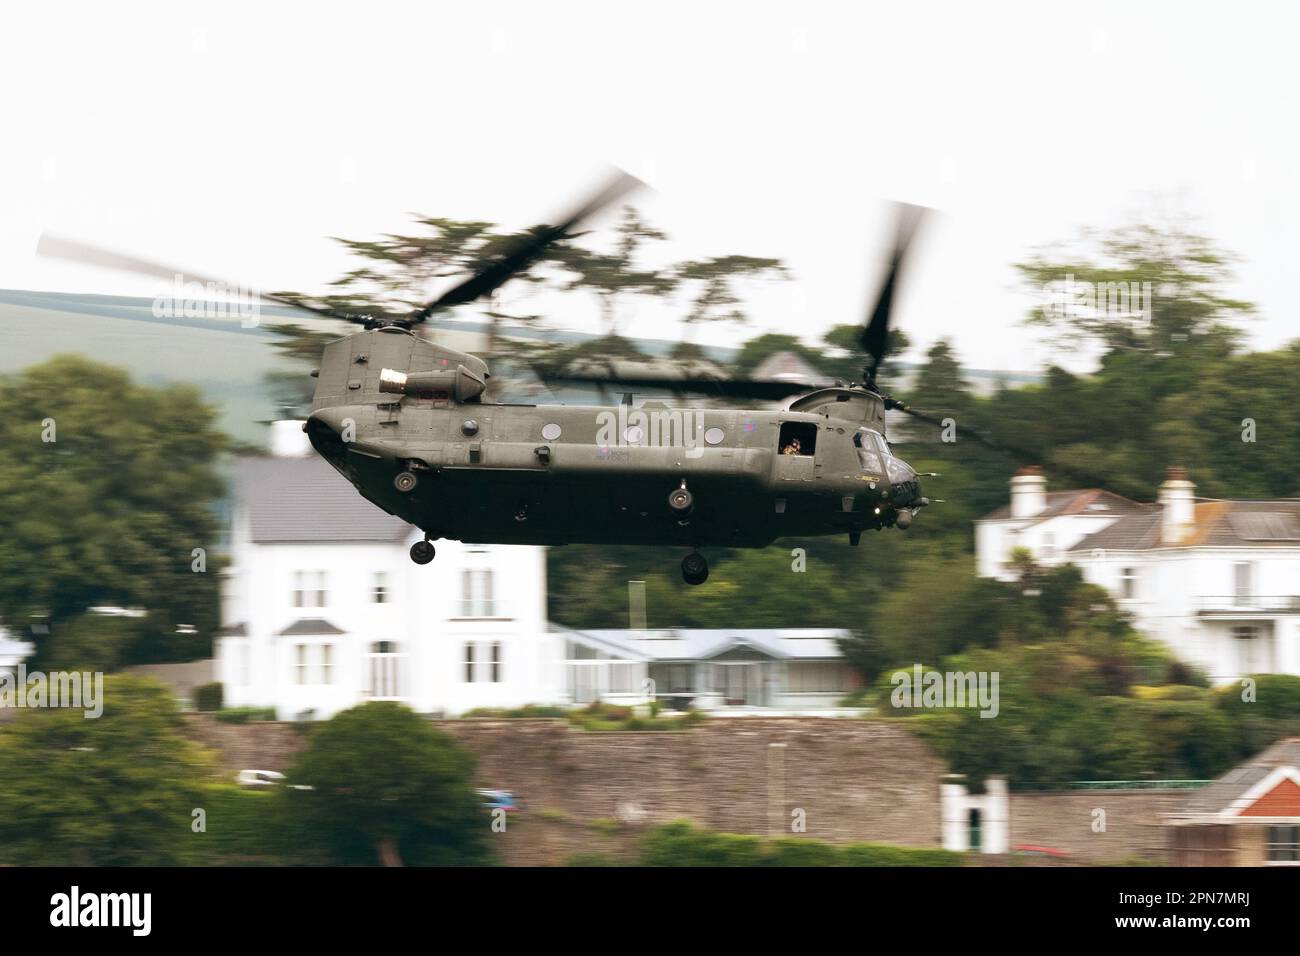 A Royal Air Force Chinook helicopter makes a low pass in front of houses in Kingswear, Devon, UK, June 2020. Photographer: Bryn Colton Stock Photo